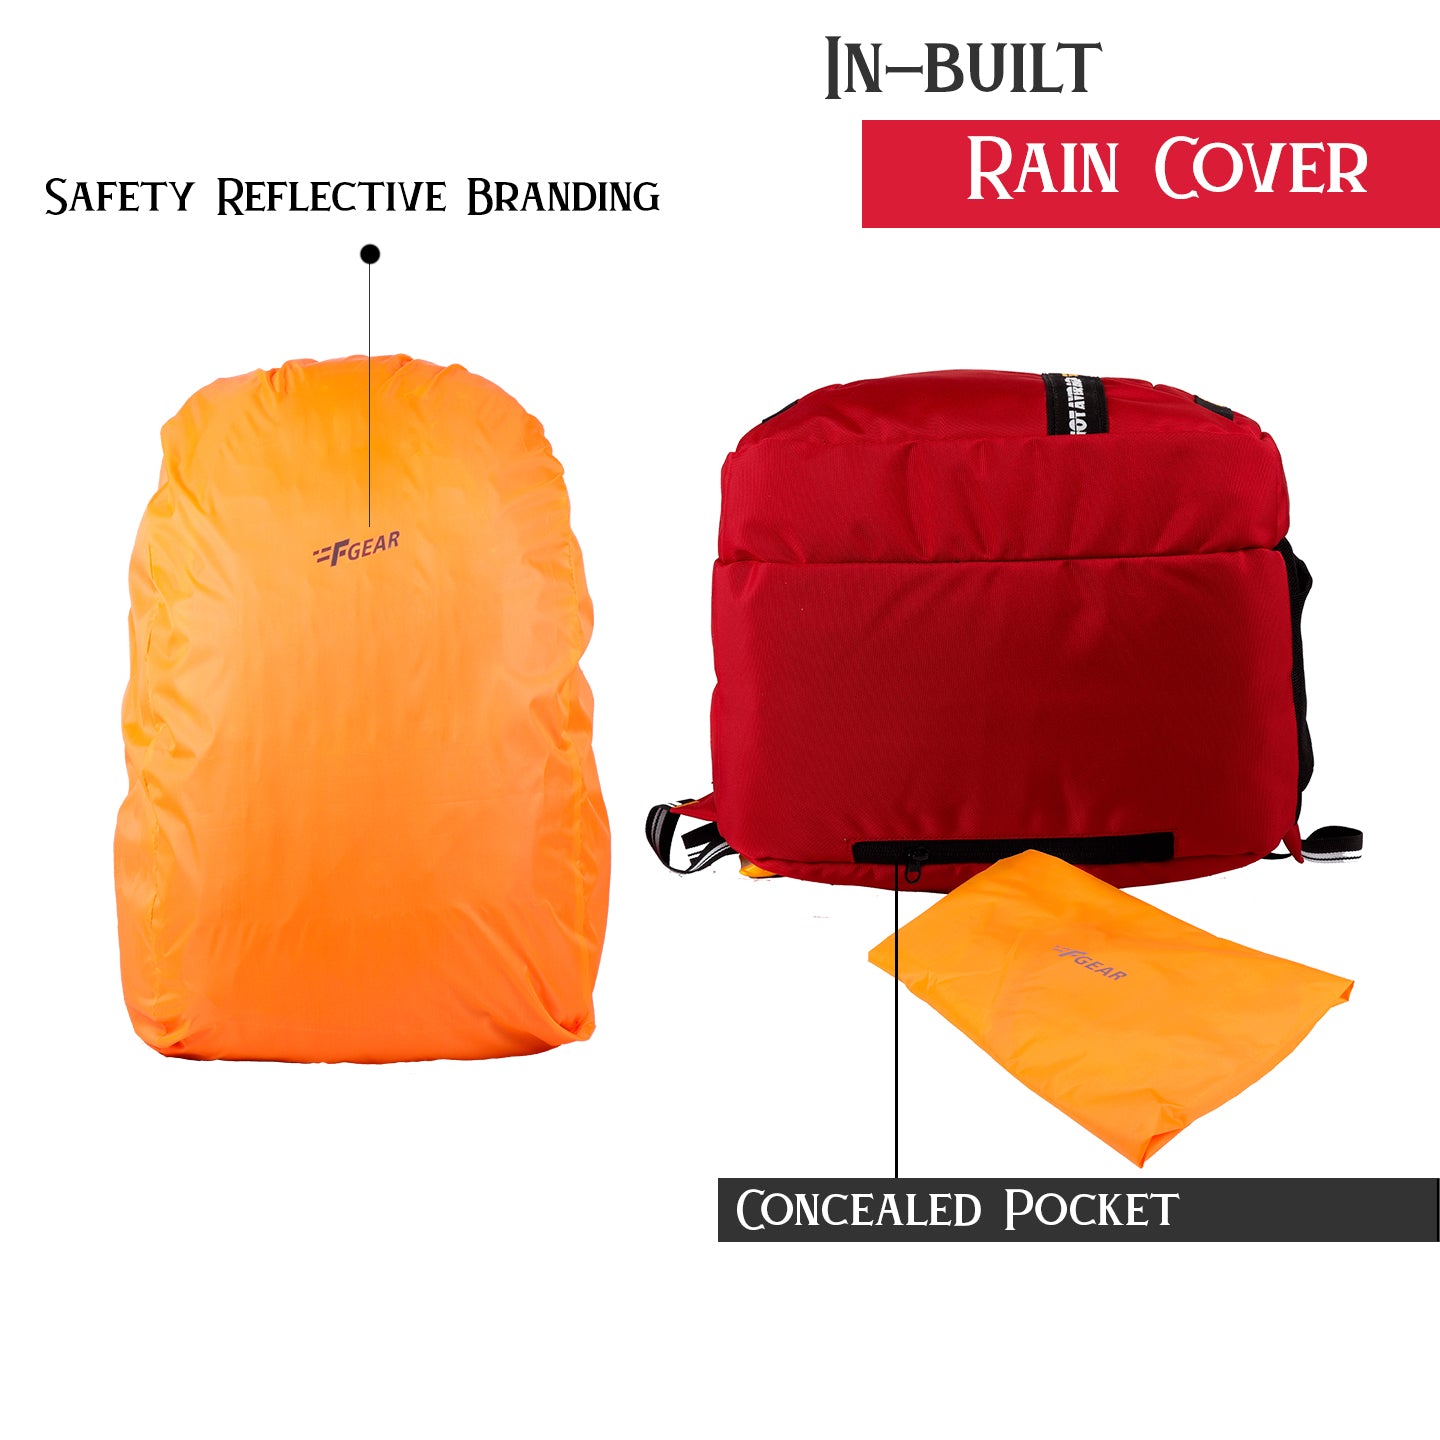 Raider 30L Guc Red Backpack With Rain Cover